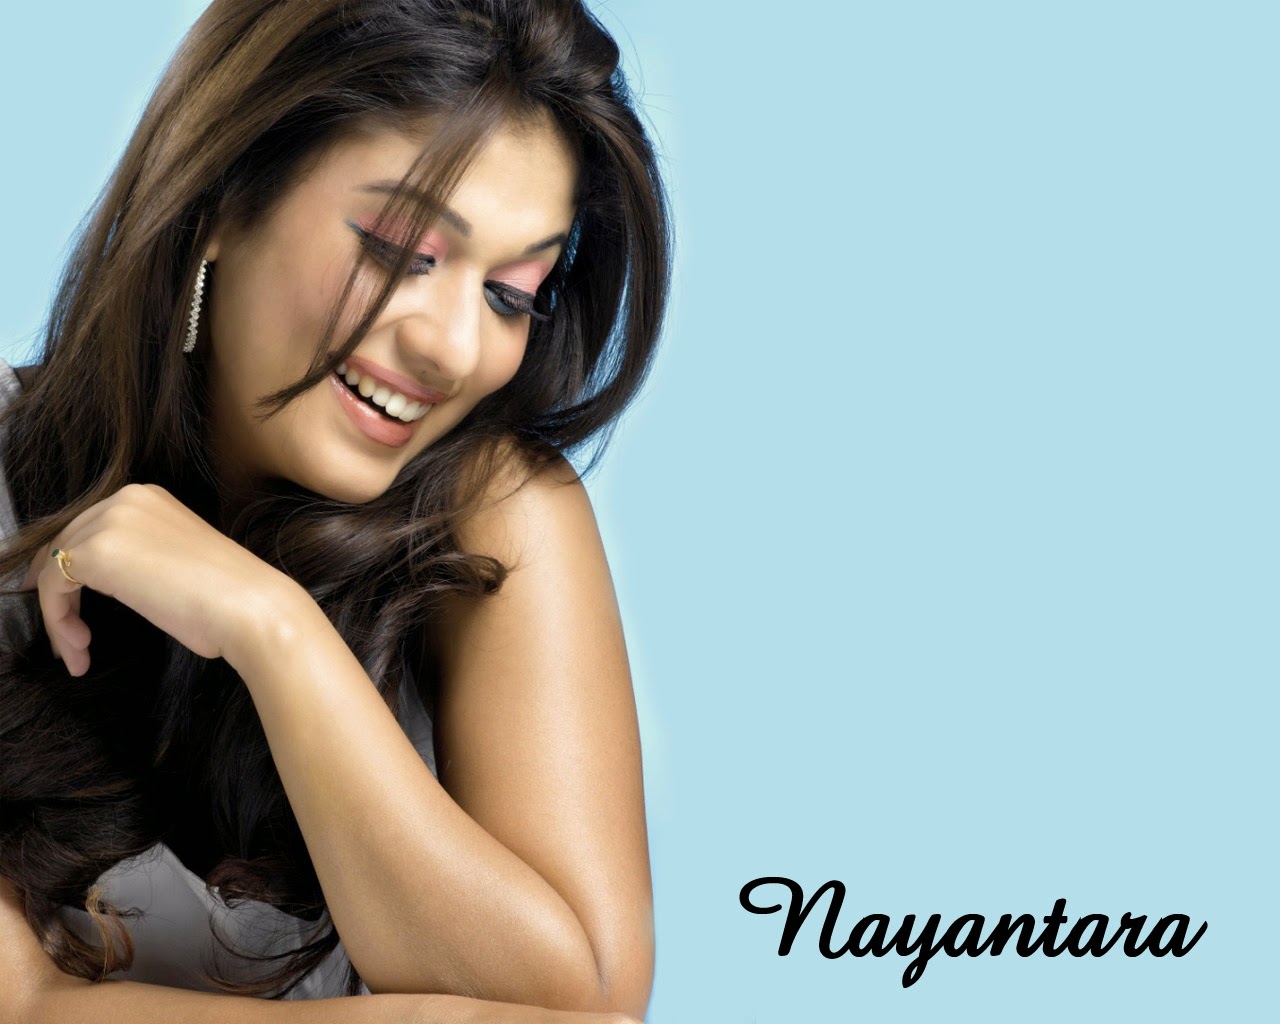 Nayanthara Hot HD Images,Pics,Photos,Wallpapers For Mobile, Android